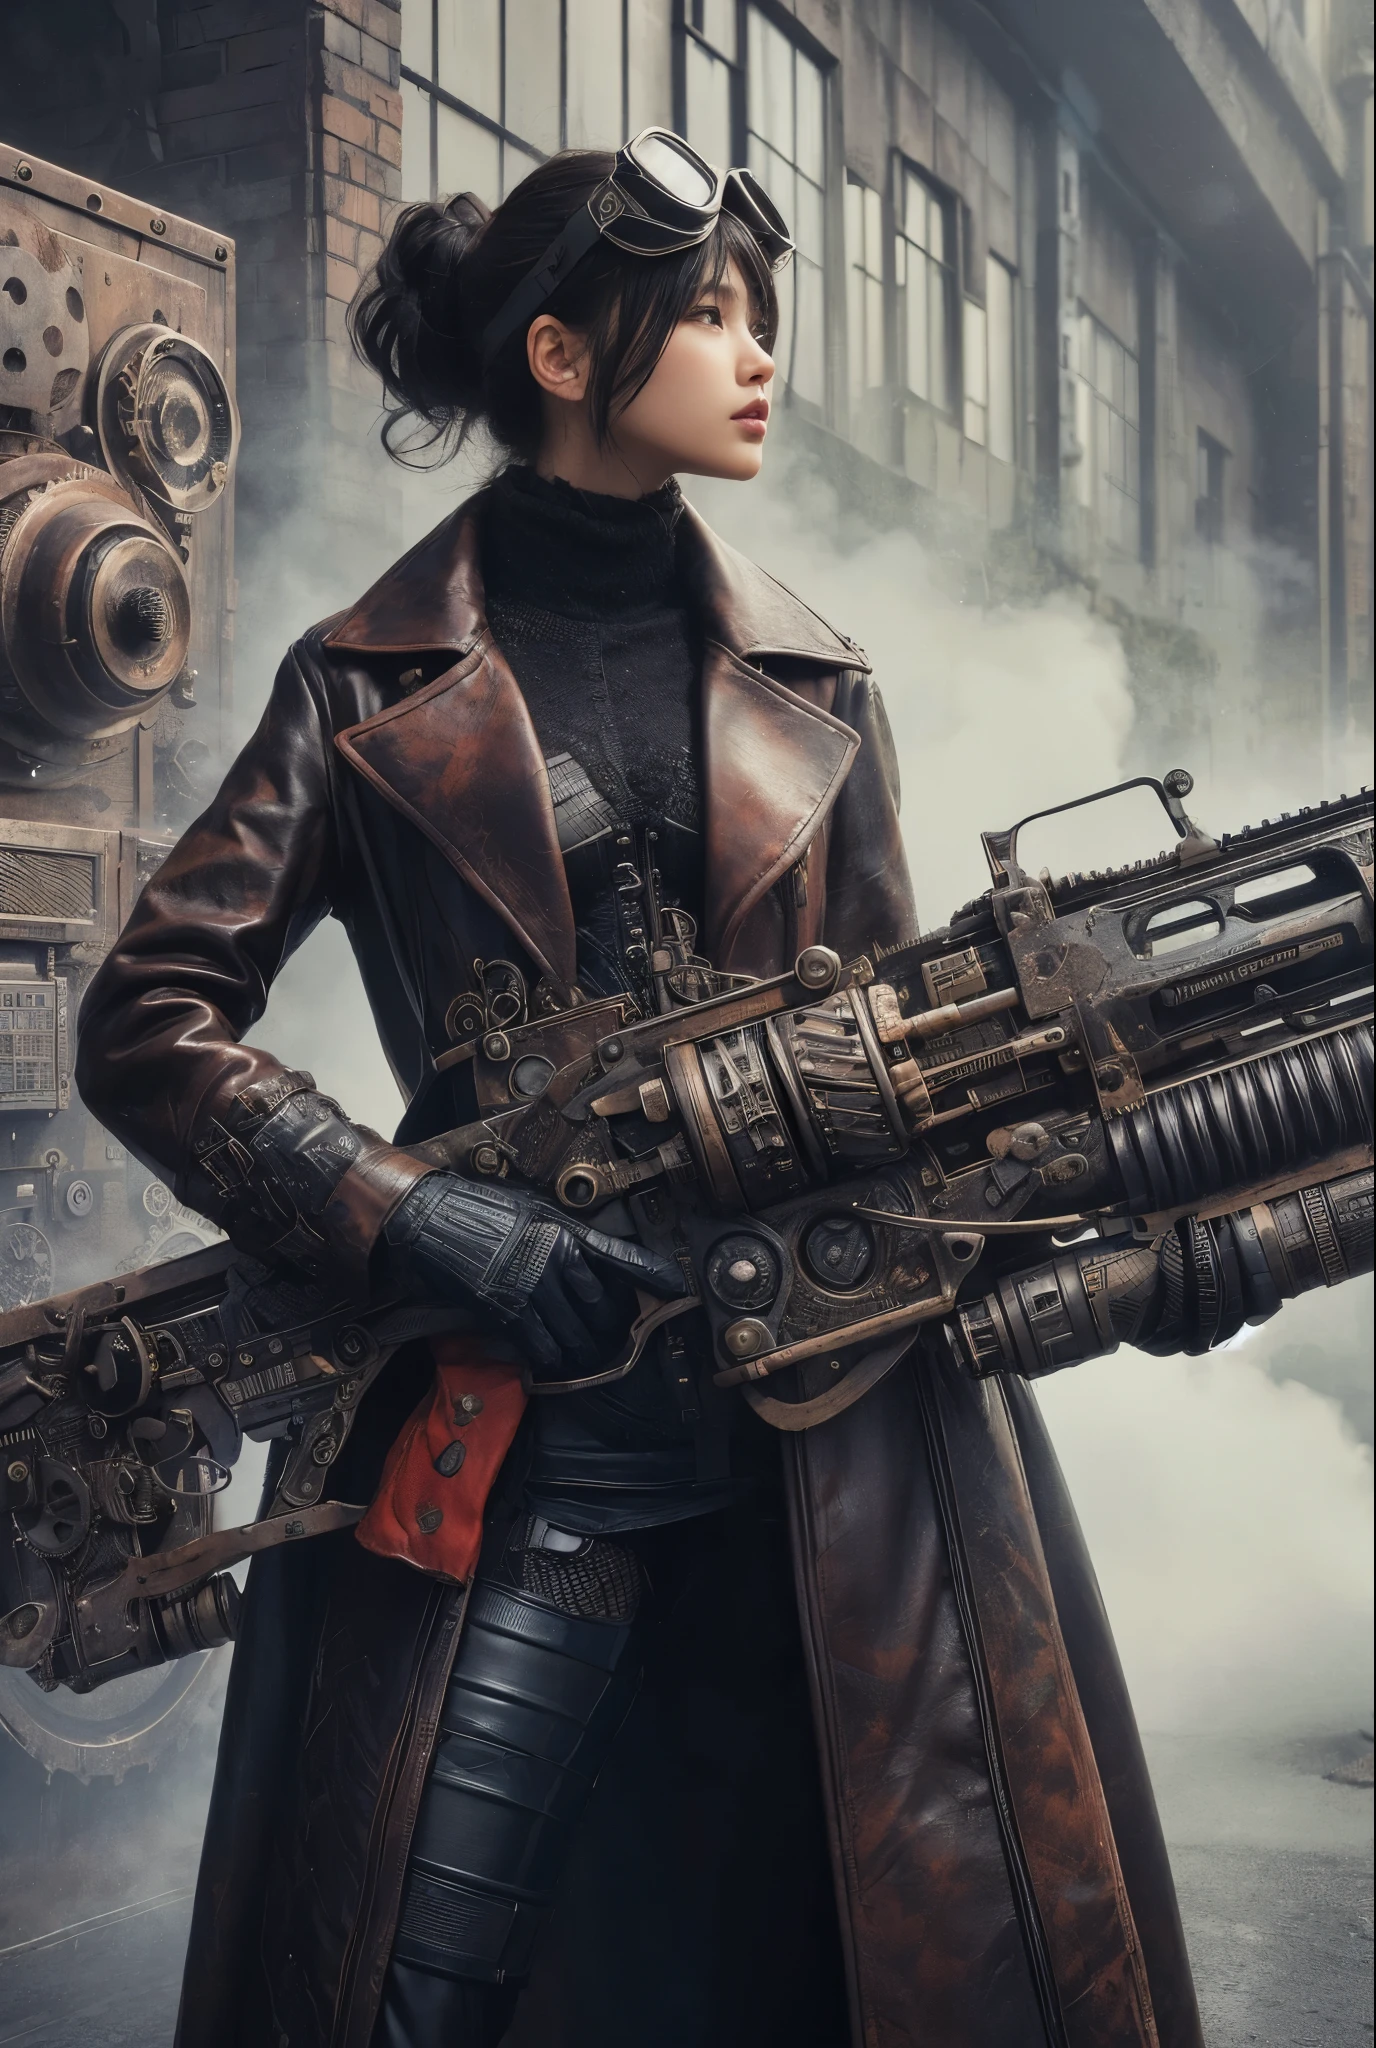 ８ｋ,Realistic Skin Texture、Superrealism、Realistic Photo、Japanese women、steampunk、Leather coat、Standing with a heavily modified oversized rifle、Light cloudiness、Dirty city、Steam rising from buildings here and there、Goggles above your head、Stand facing forward in front of a wall with intricate patterns and gears、